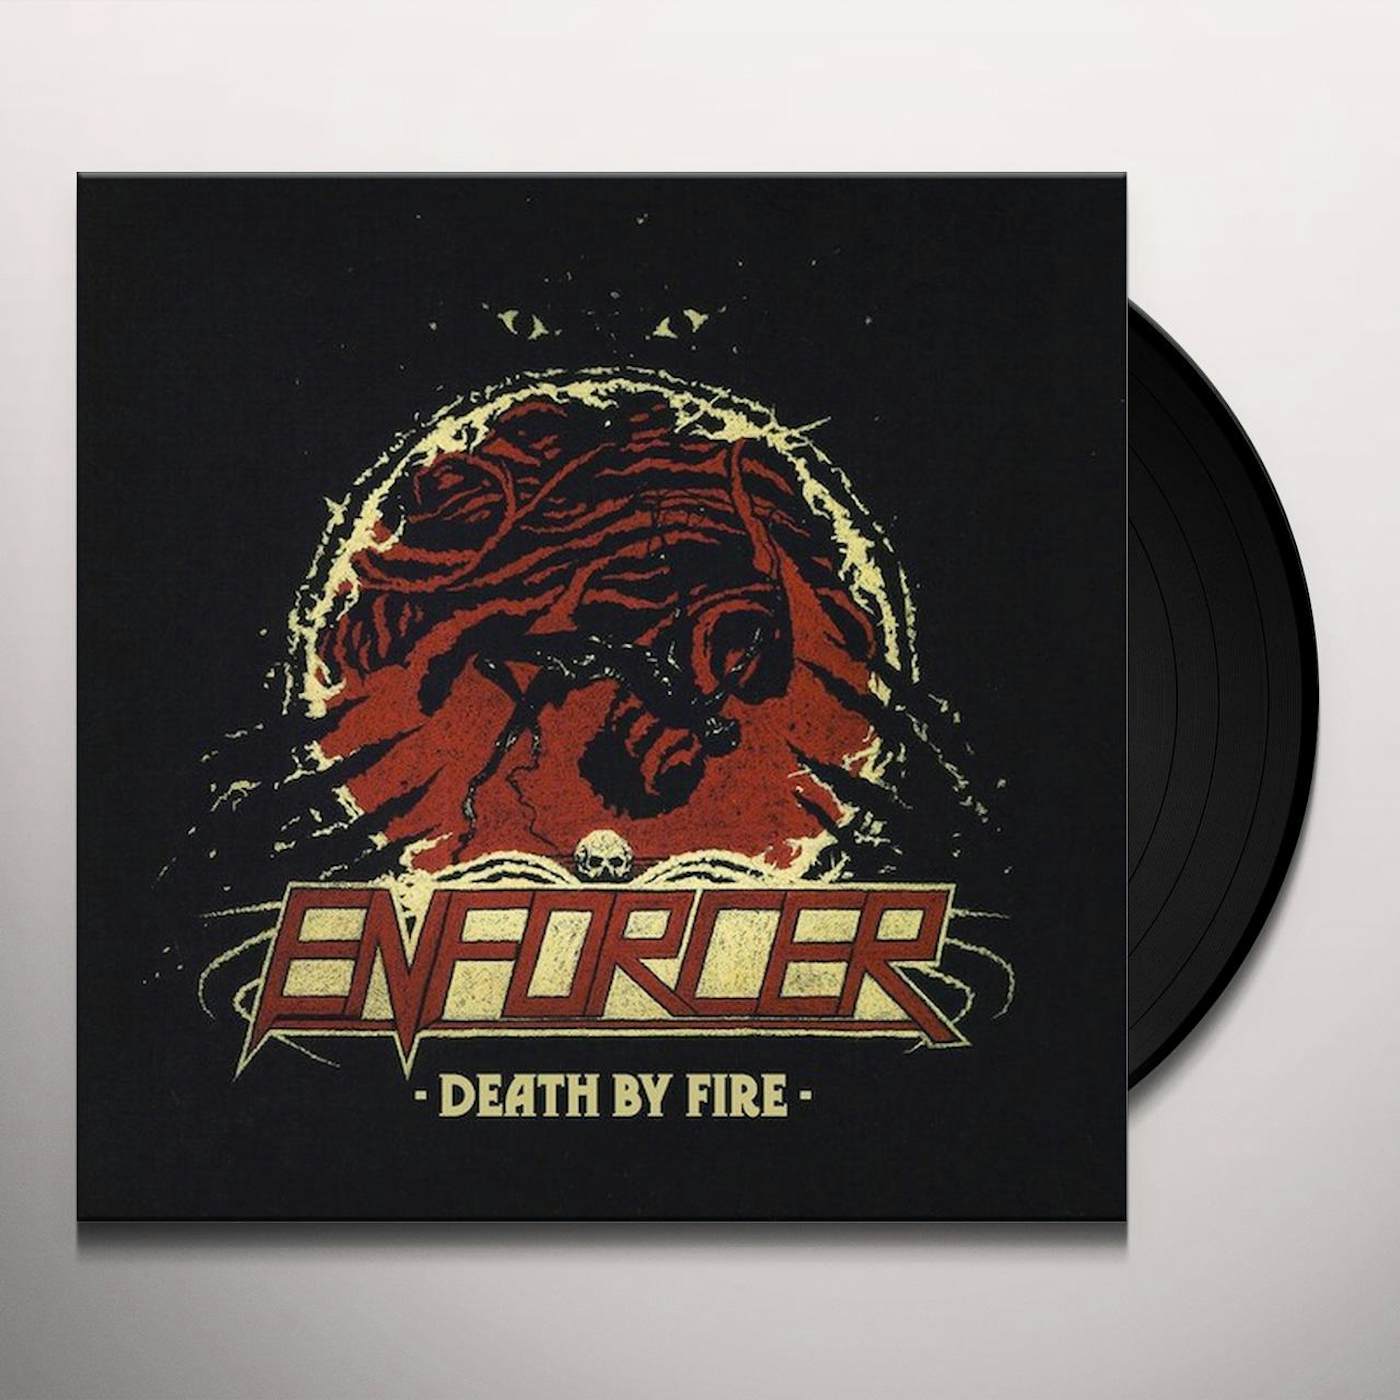 Enforcer Death by Fire Vinyl Record